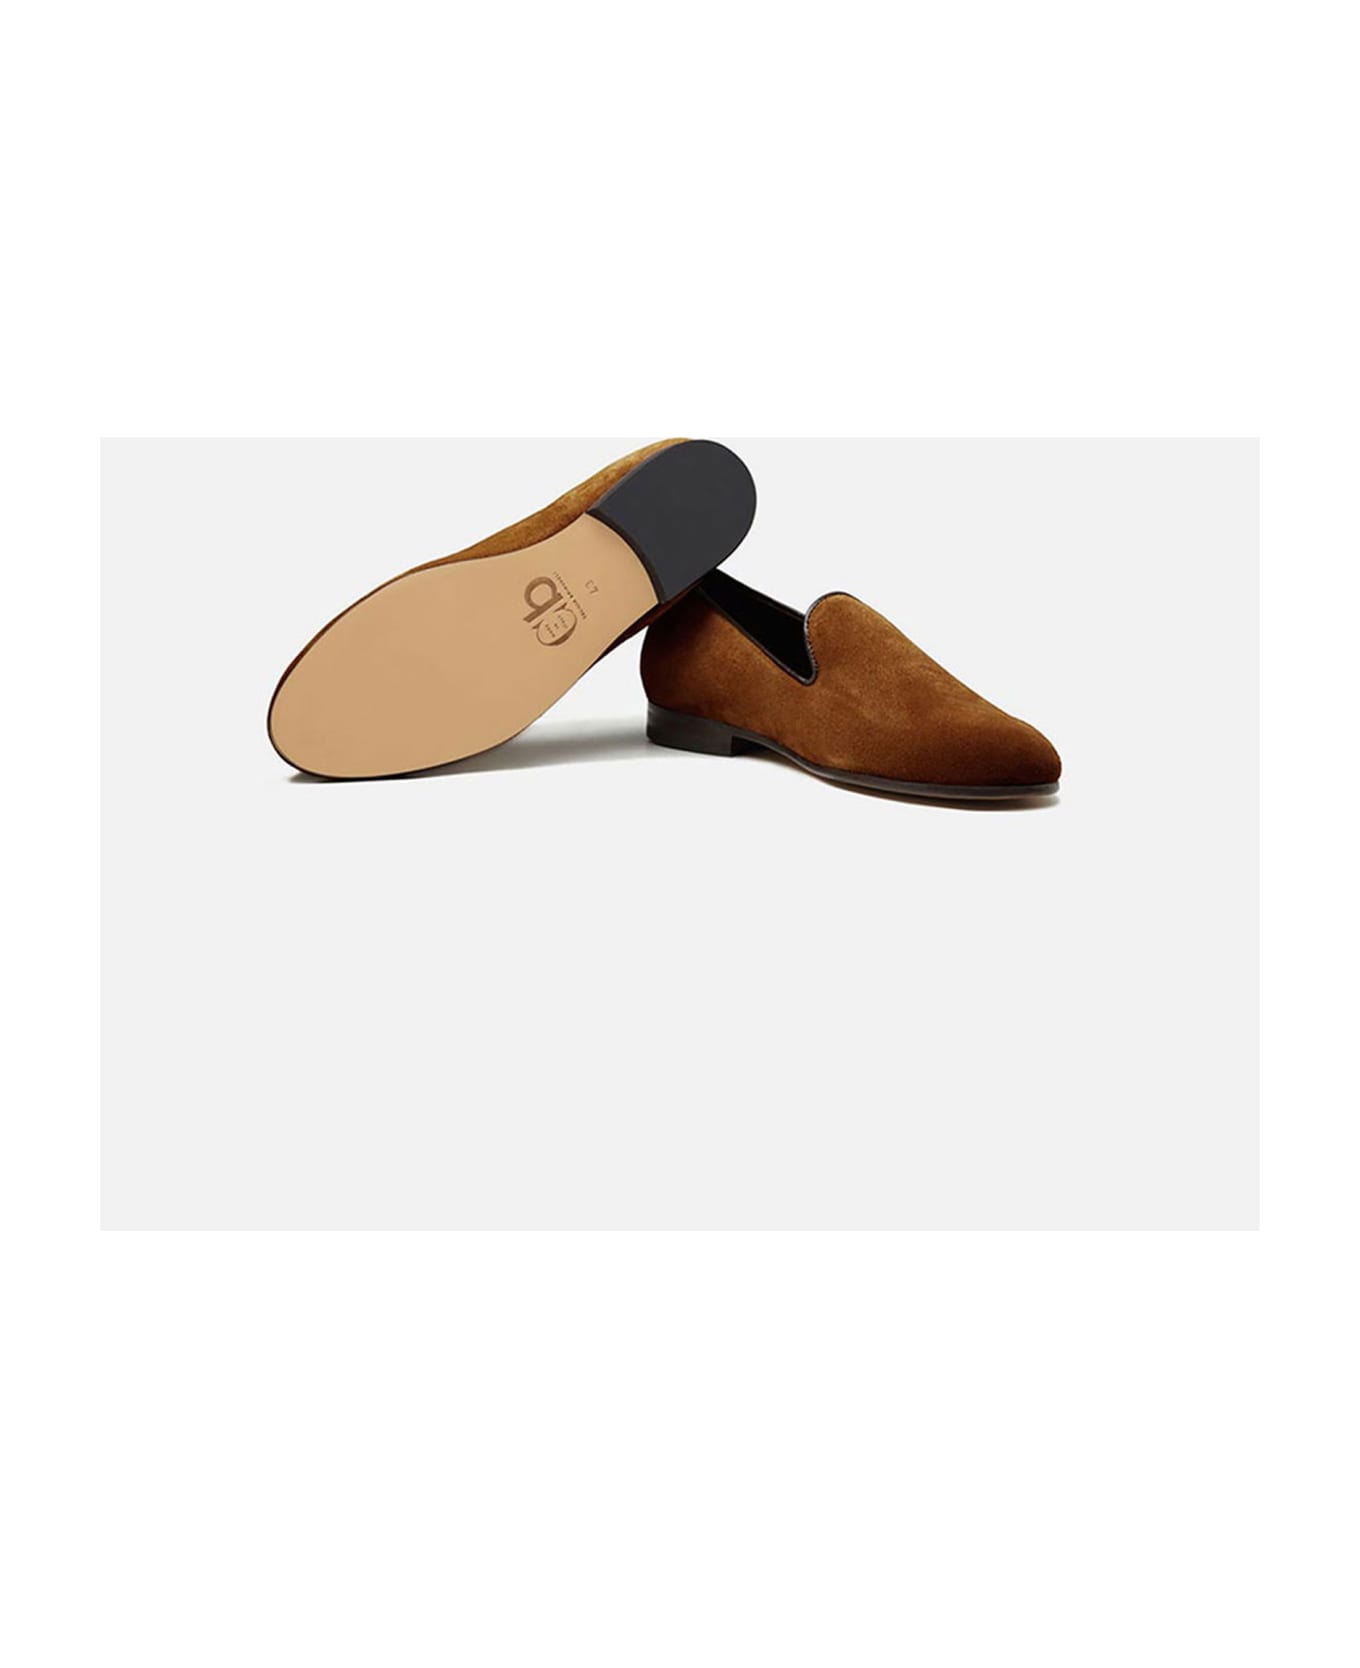 CB Made in Italy Suede Flats Positano - Tobacco